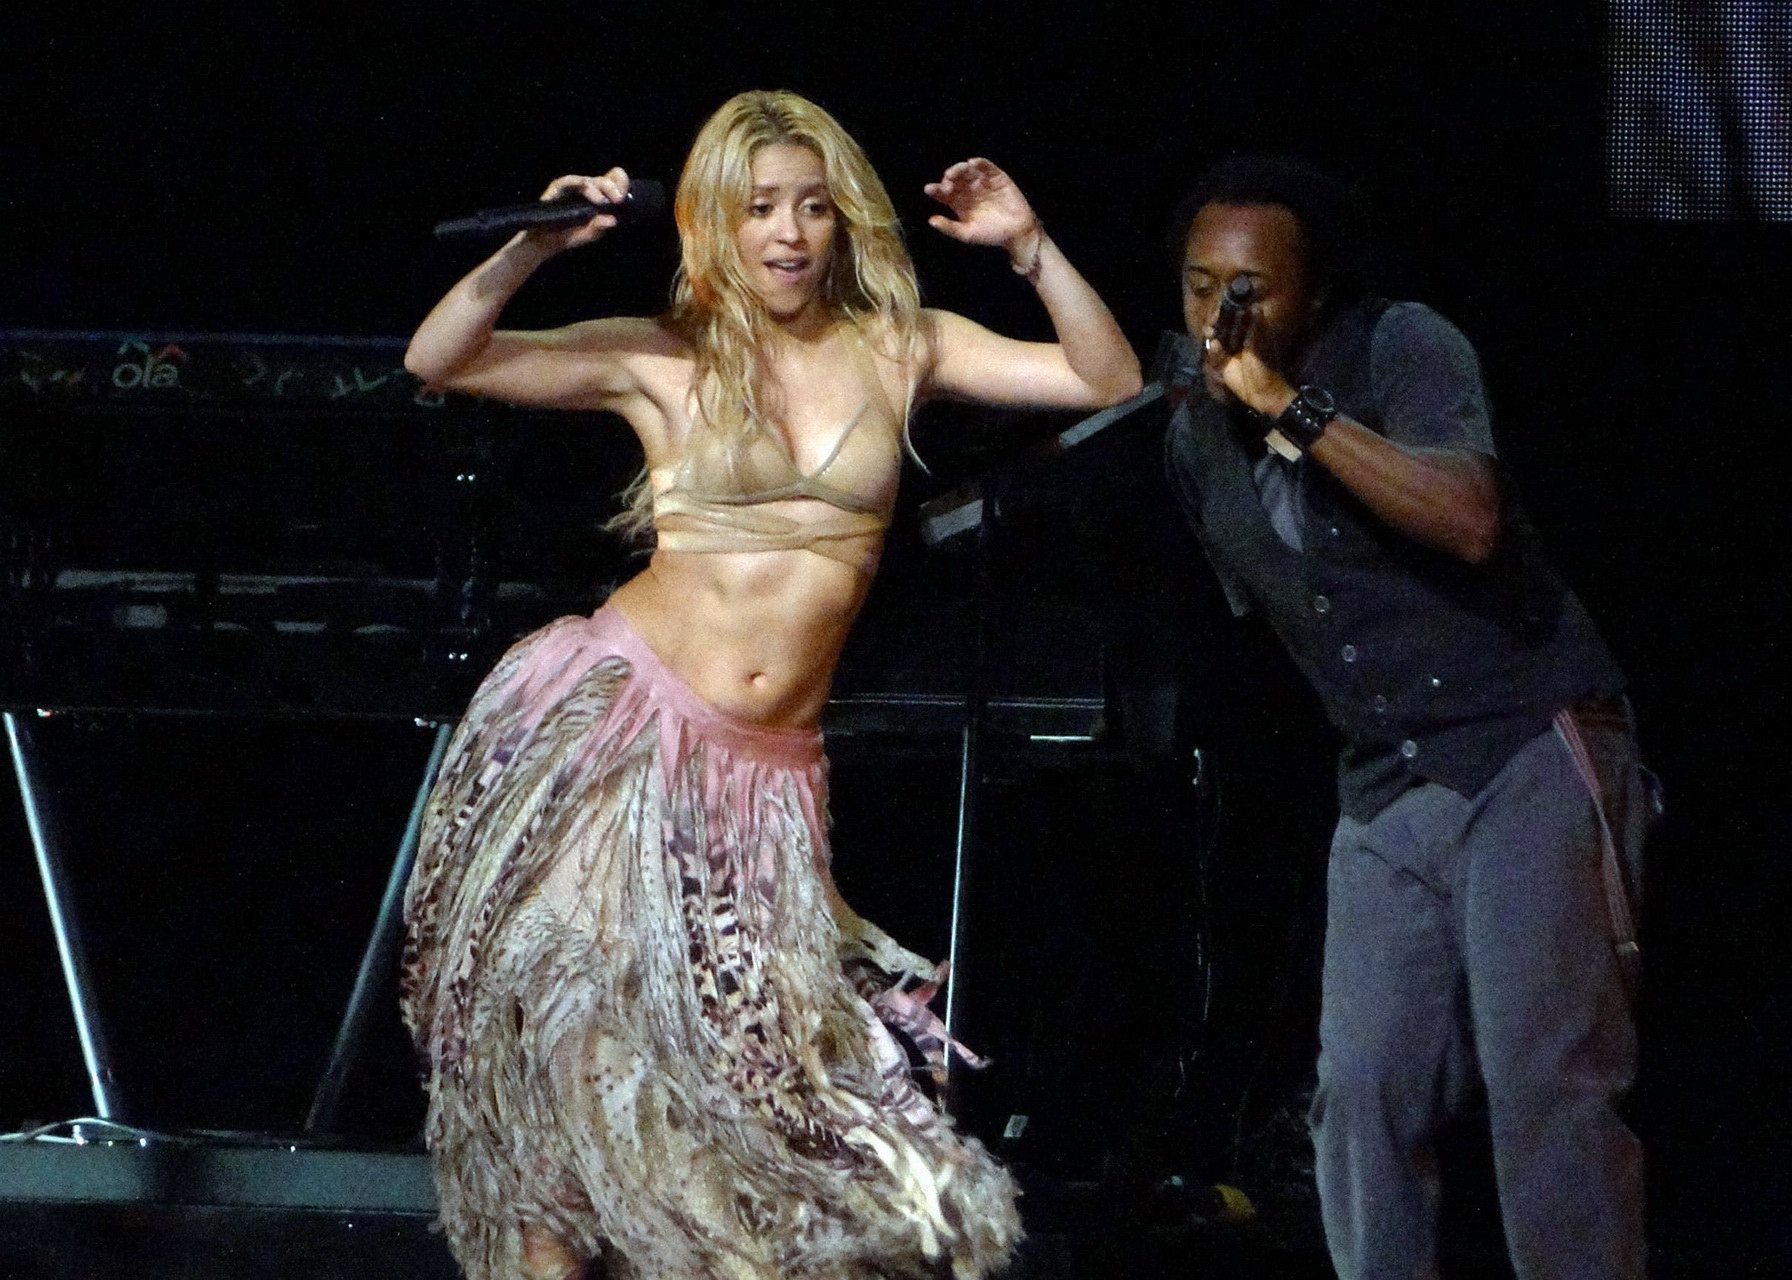 Shakira Ripoll belly dancing on the stage in Miami #75331630